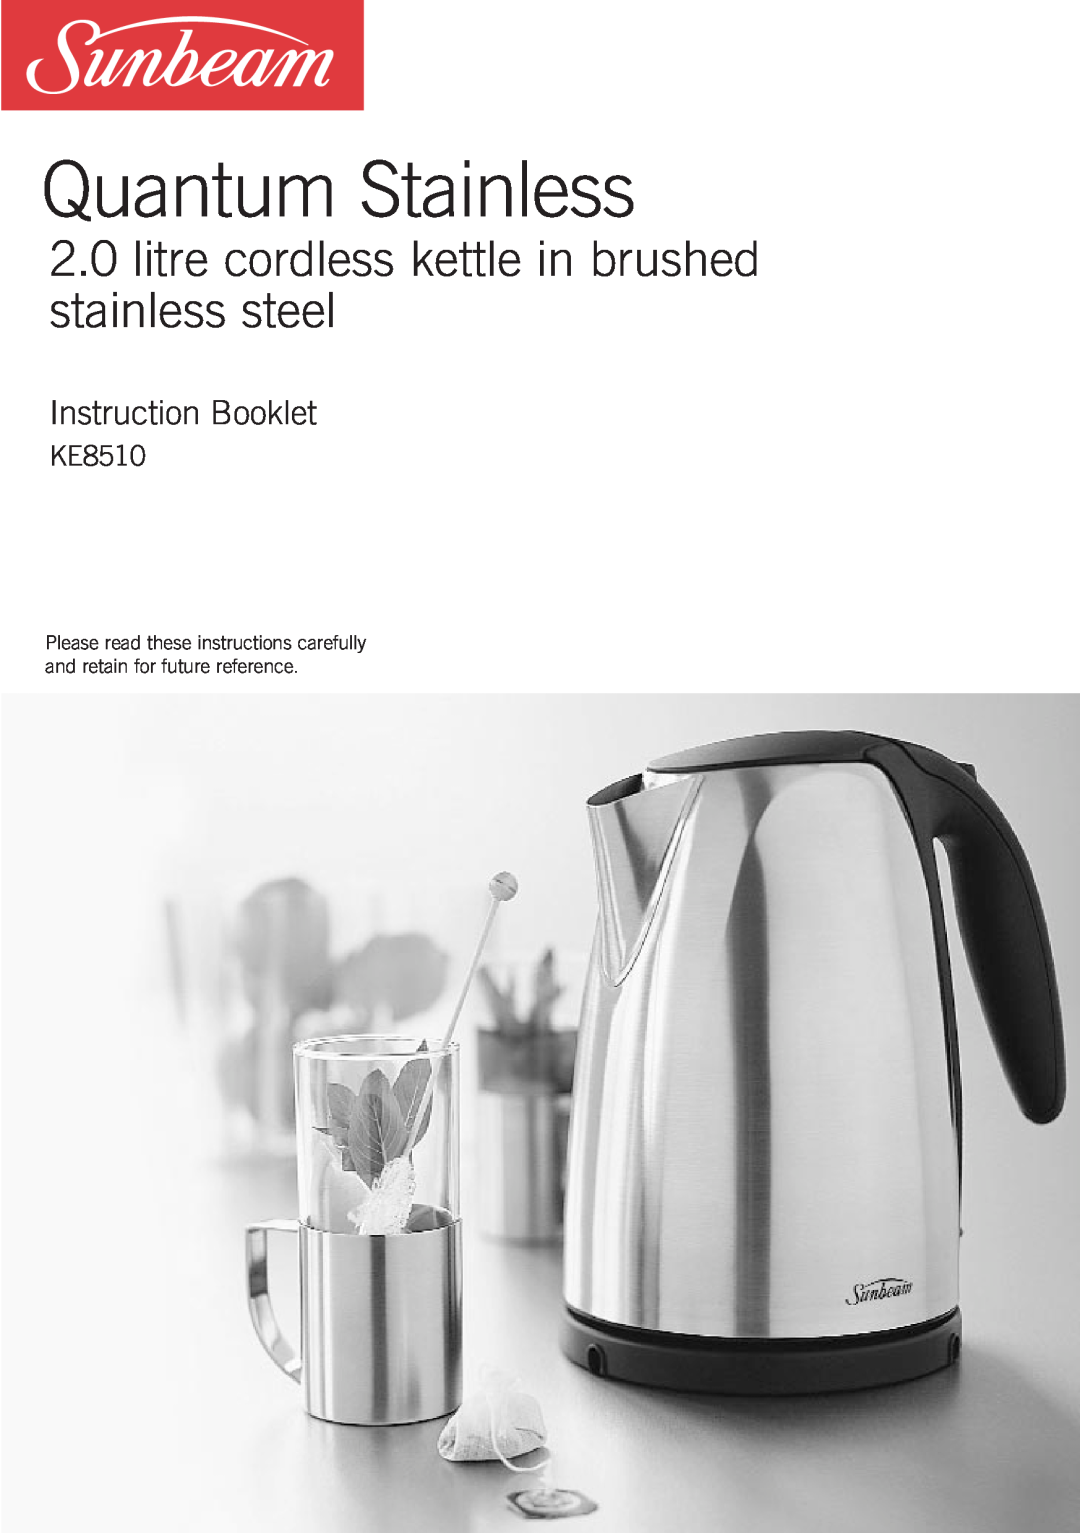 Sunbeam KE8510 manual Quantum Stainless, litre cordless kettle in brushed stainless steel, Instruction Booklet 